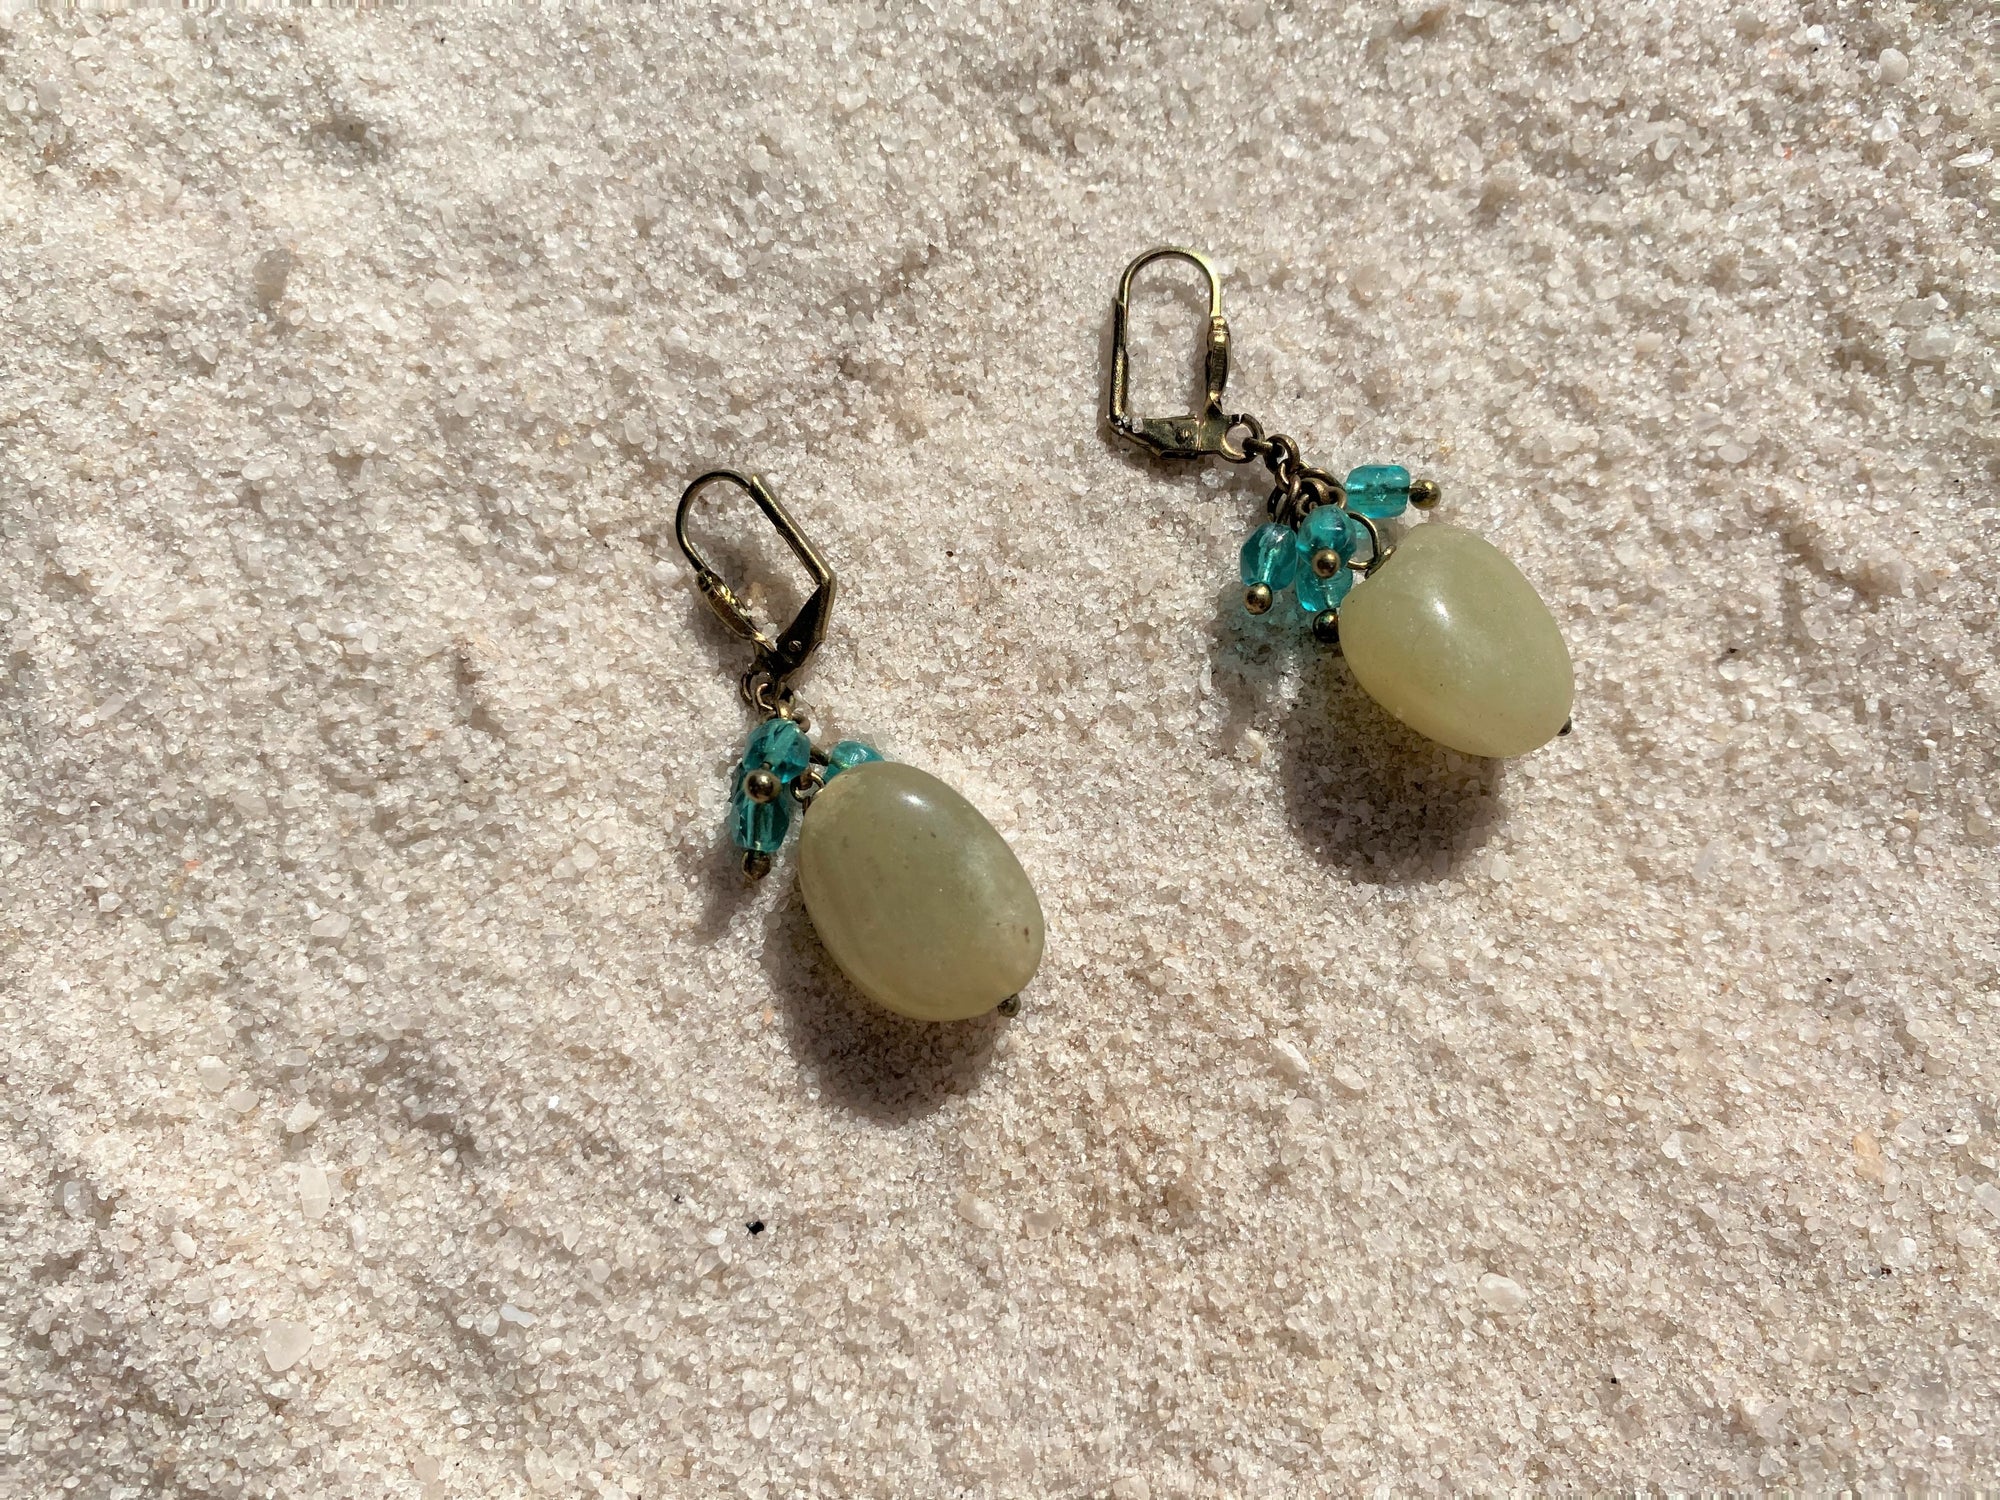 Olive Teardrop Stone Earrings with Teal Glass Clusters